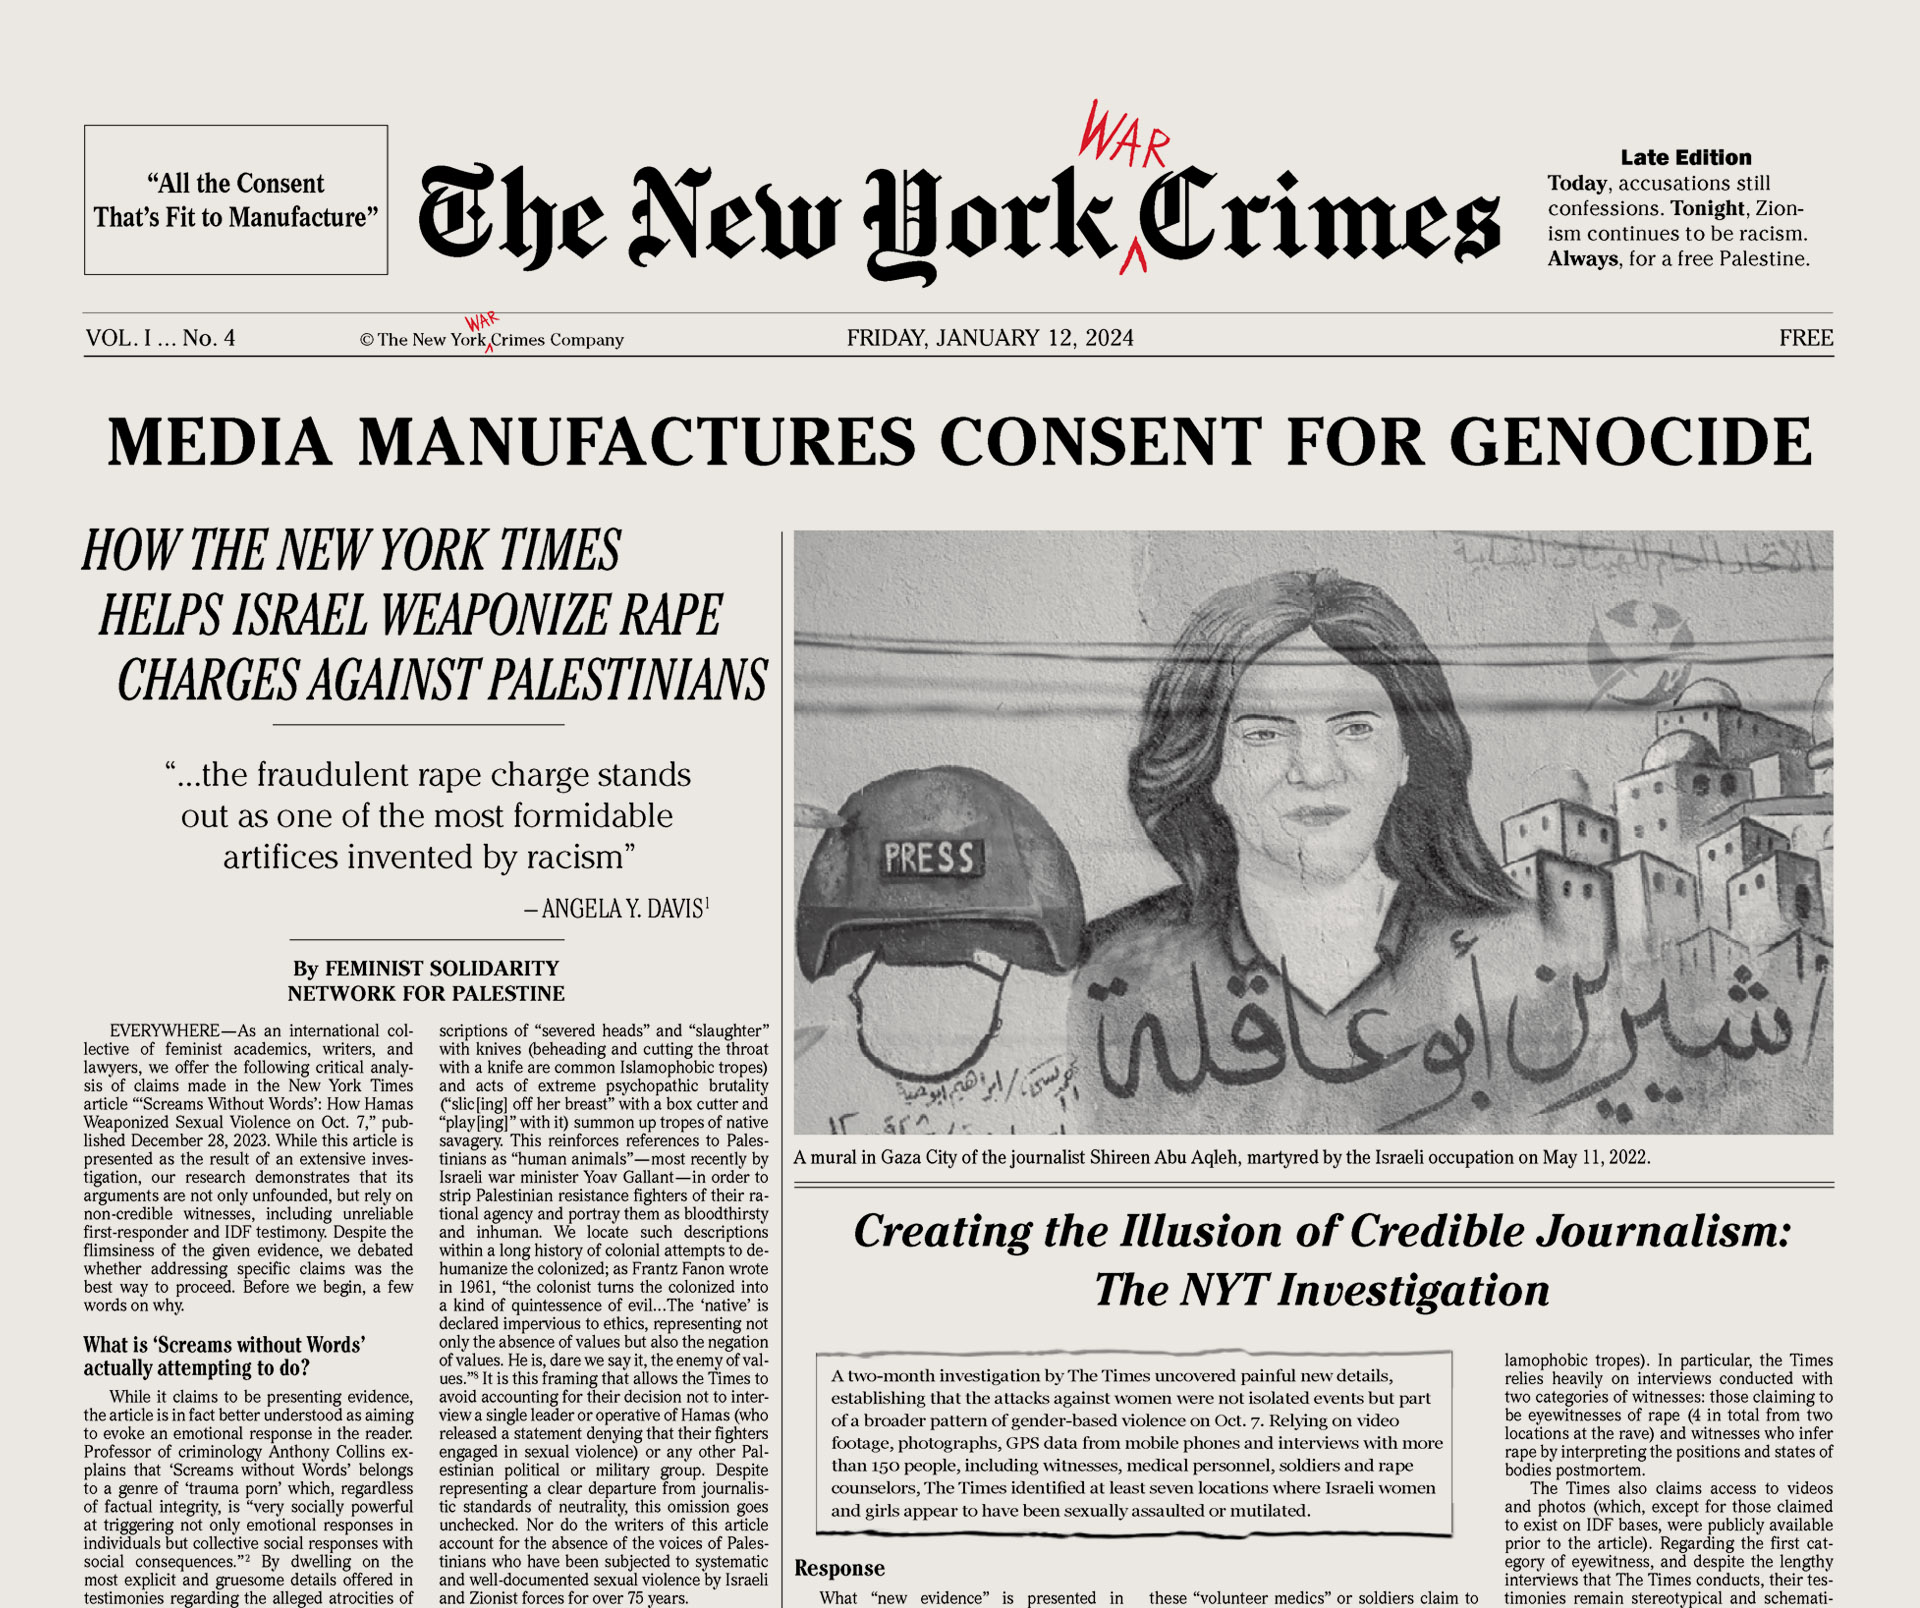 https://newyorkwarcrimes.com/media/pages/print-issue-vol-i-no-4-media-manufactures-consent-for-genocide/961ca9fbdc-1709308326/ny-crimes-04-cover.jpg